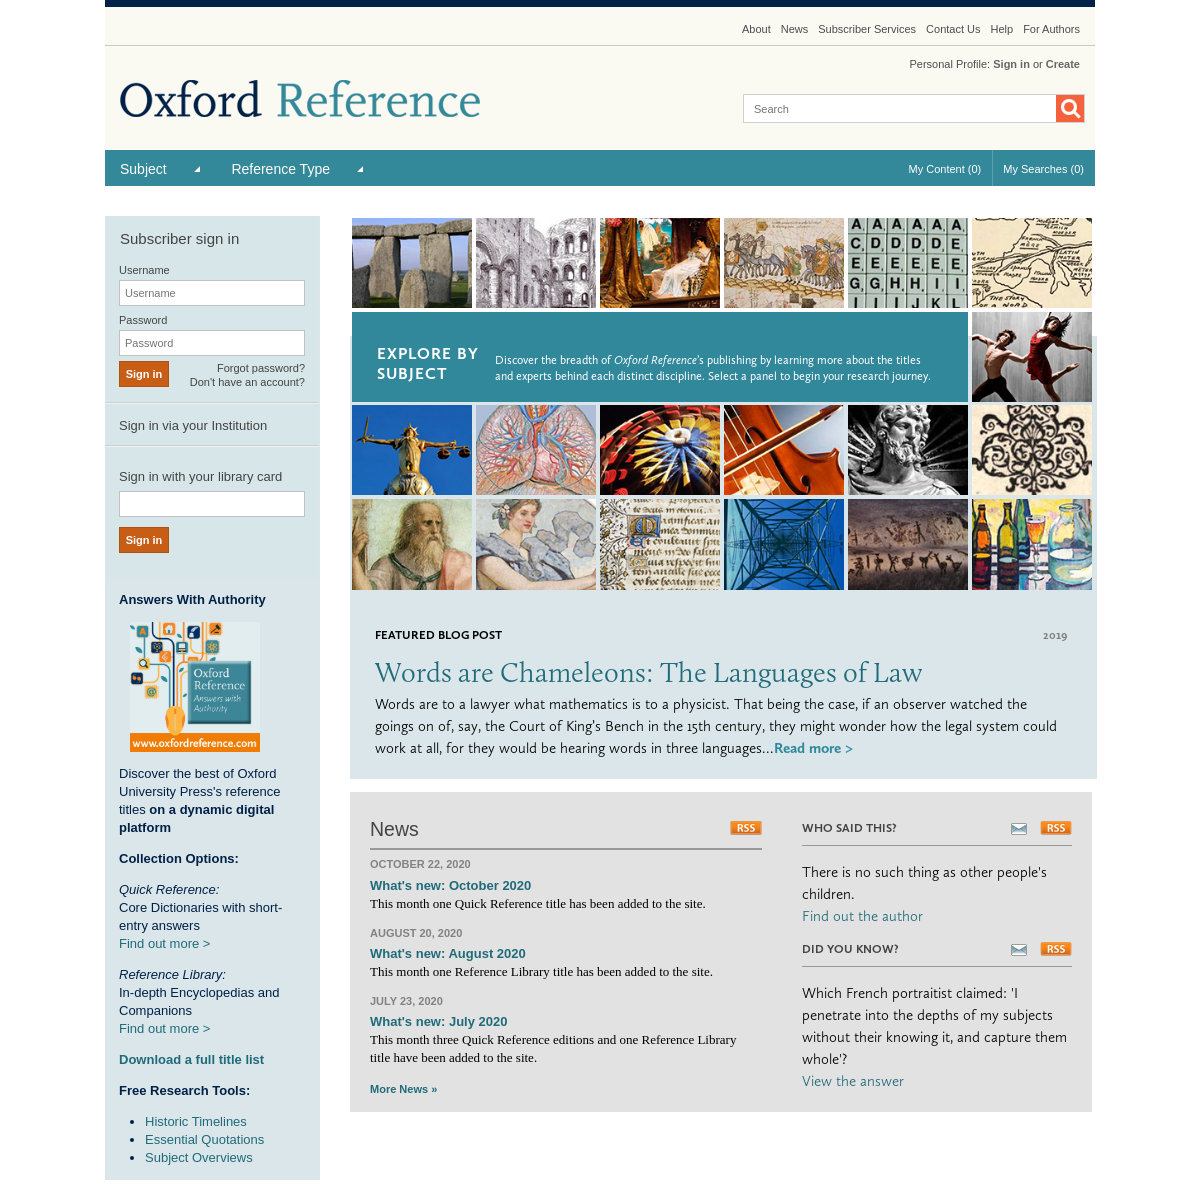 oxford-reference-answers-with-authority